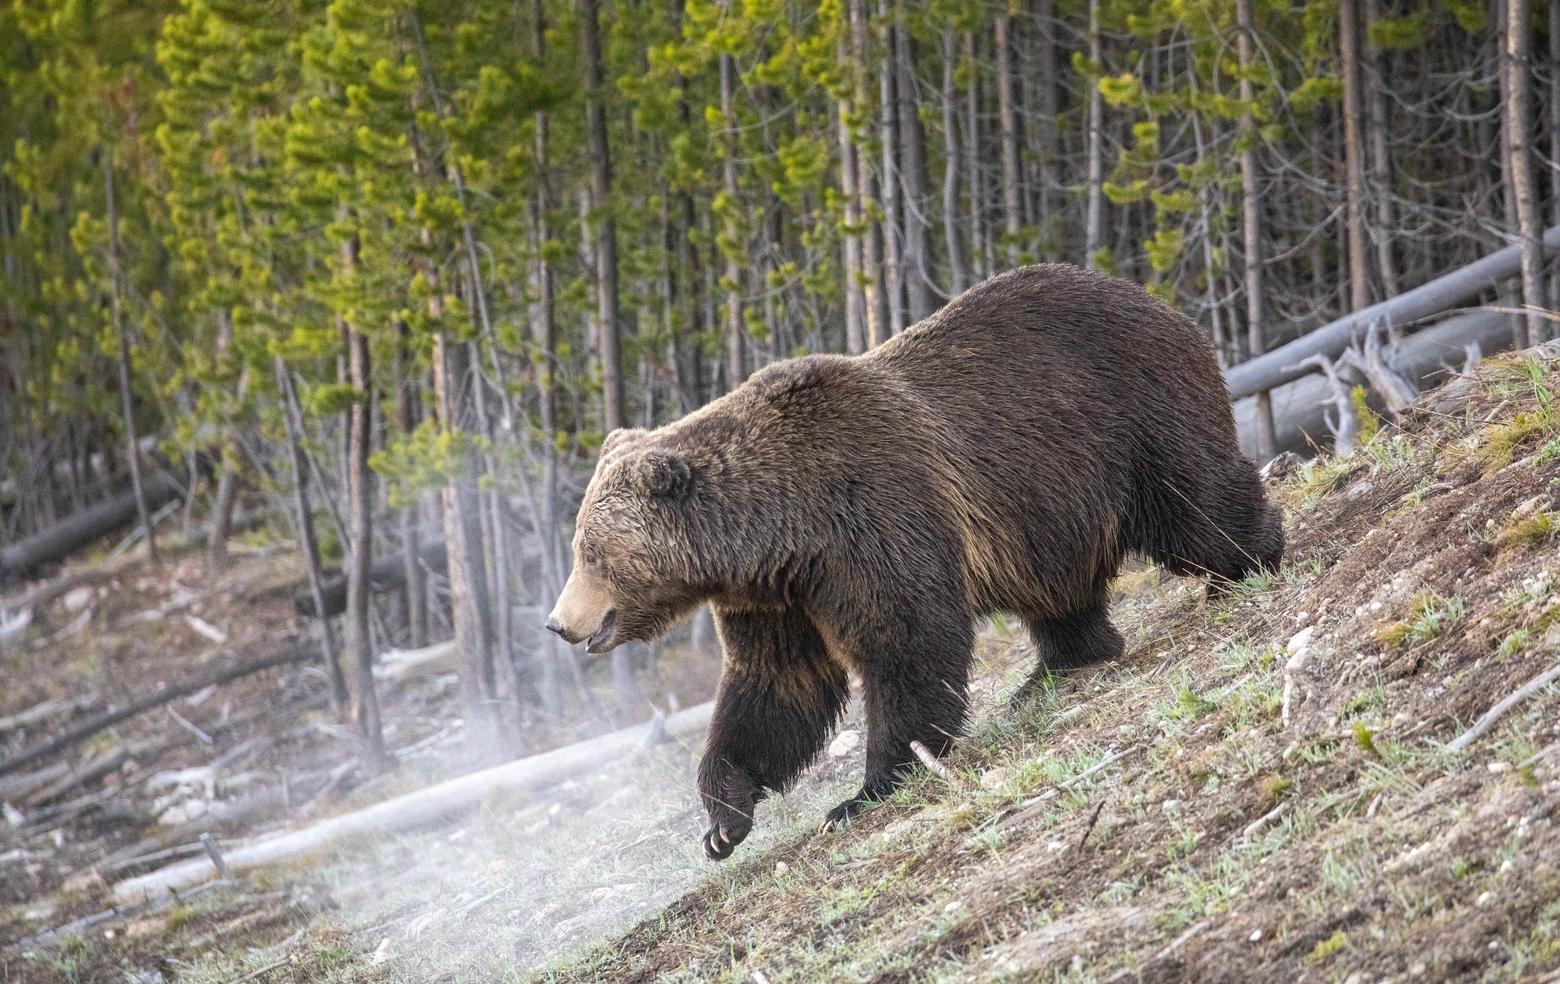 Grizzly bears in the Lower 48 were placed on the endangered species list in 1975. The states of Wyoming, Idaho and Montana have petitioned the U.S. Fish and Wildlife Service to remove grizzlies form the list. FWS is reviewing the petitions. Photo by Jim Peaco/NPS